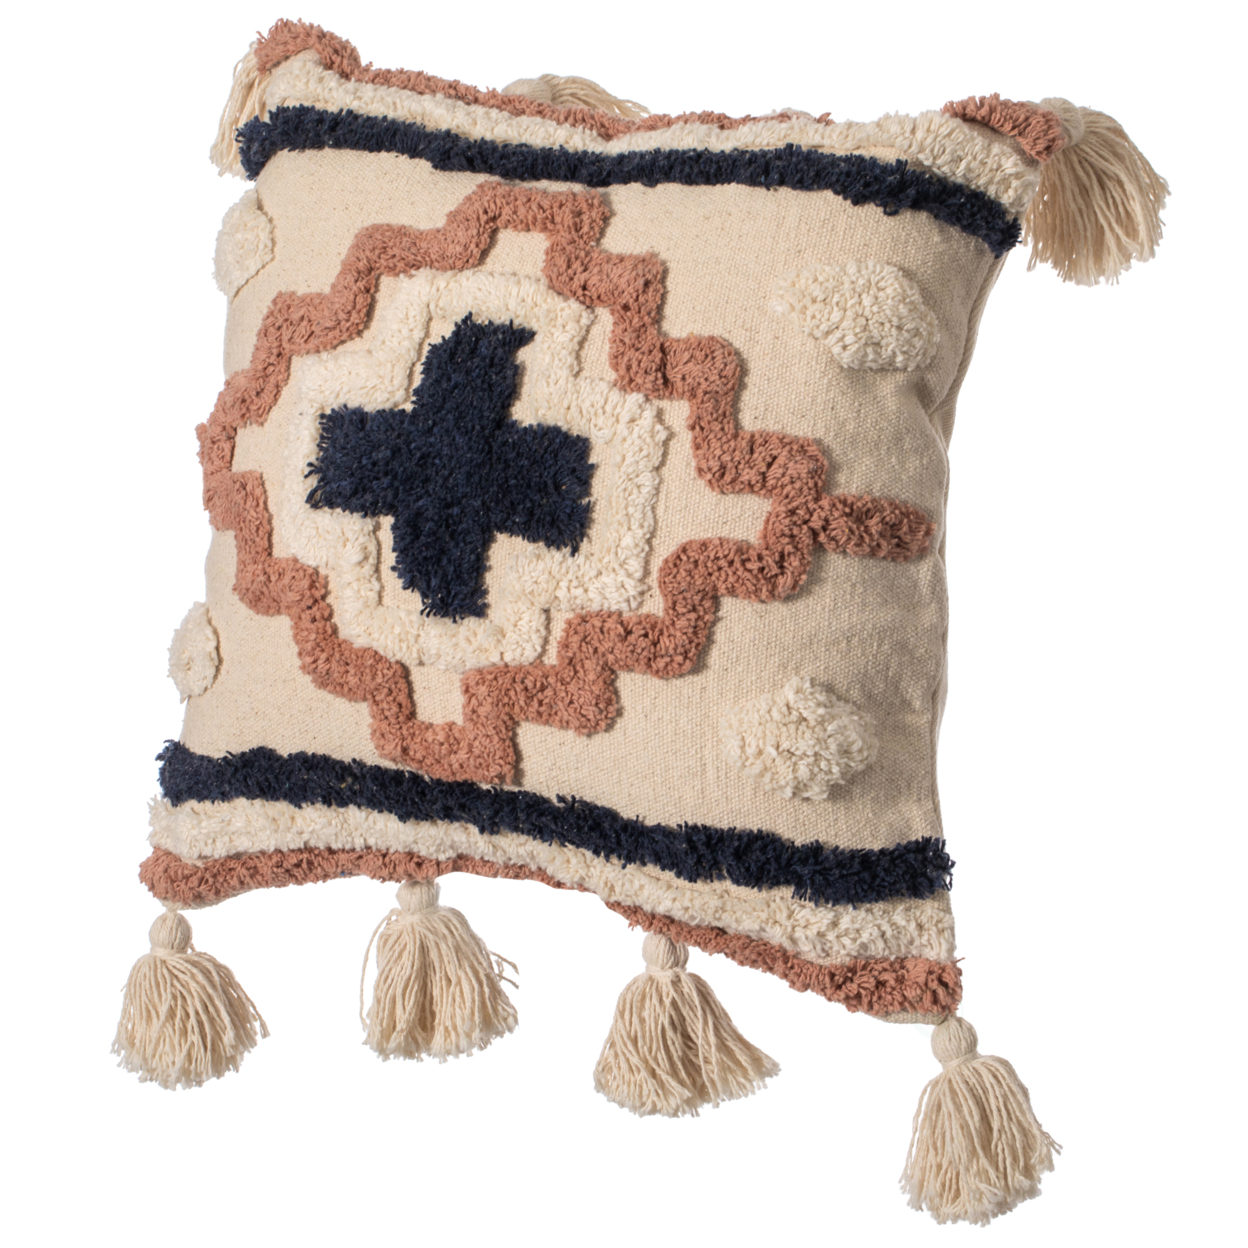 16 Handwoven Cotton Throw Pillow Cover With Tufted Designs And Side Tassels - Dots